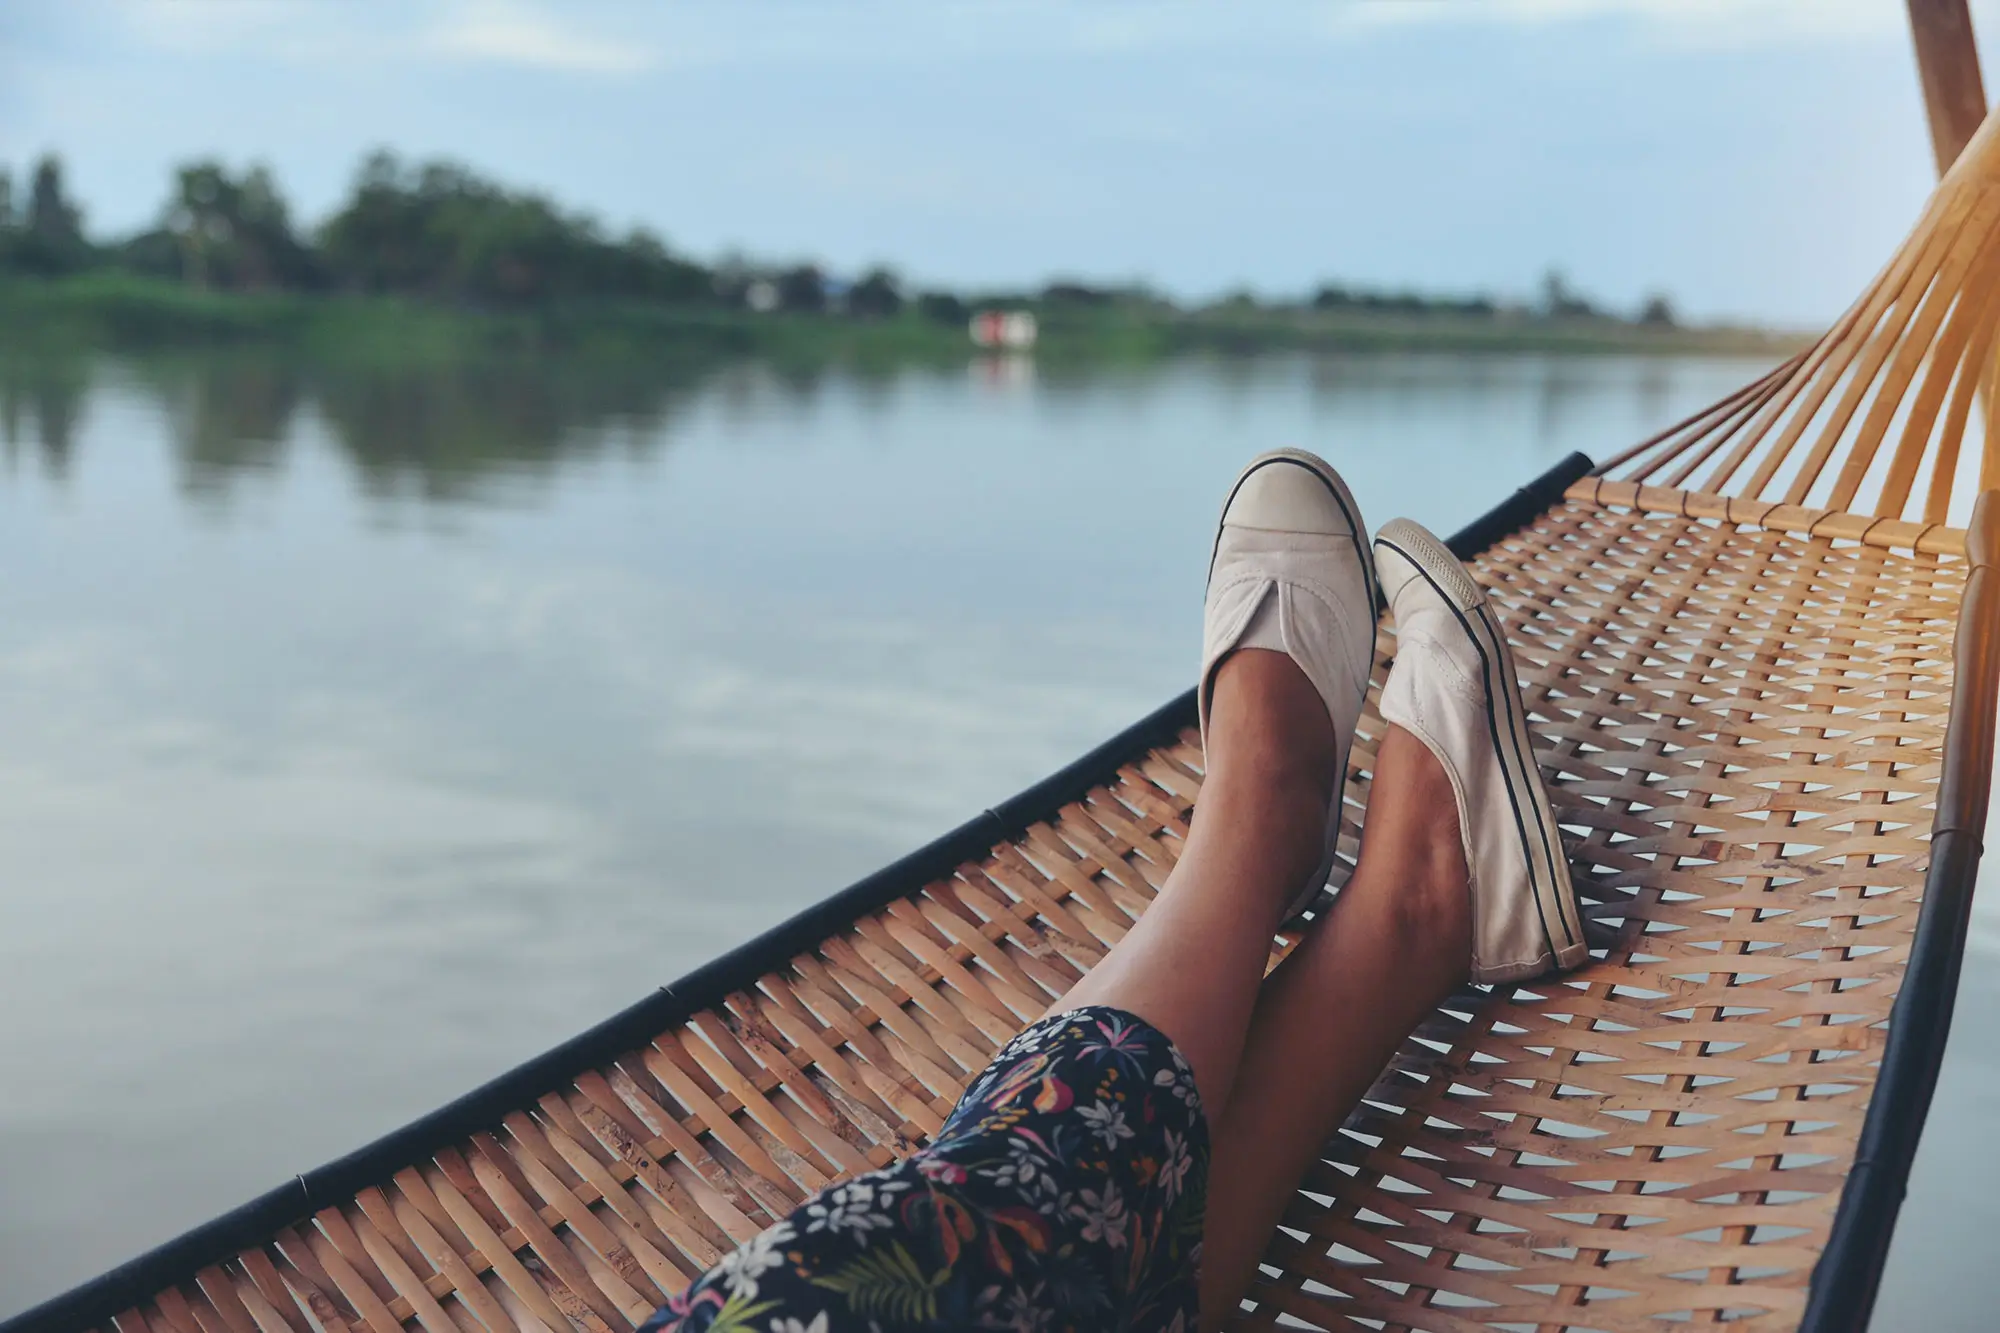 View of a lake with feet lounging in a hammock in the foreground